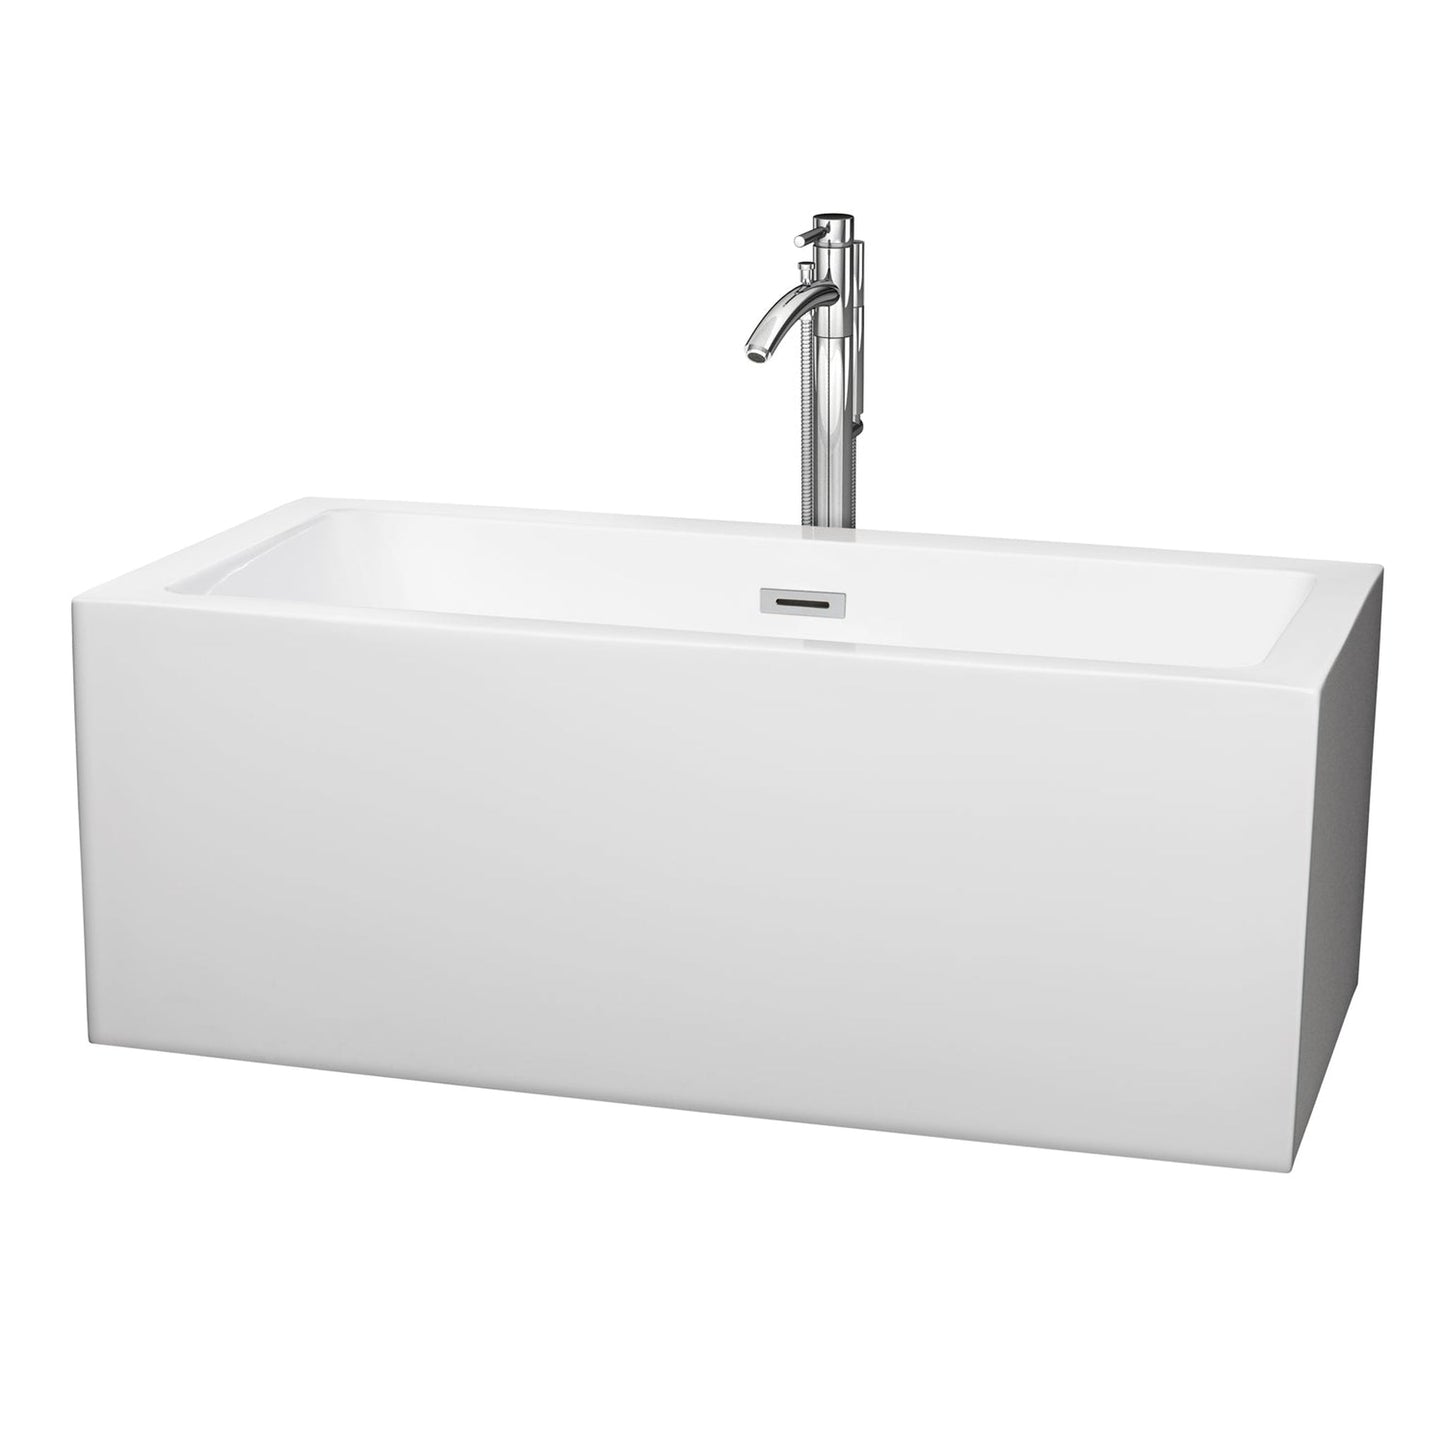 Wyndham Collection Melody 60" Freestanding Bathtub in White With Floor Mounted Faucet, Drain and Overflow Trim in Polished Chrome